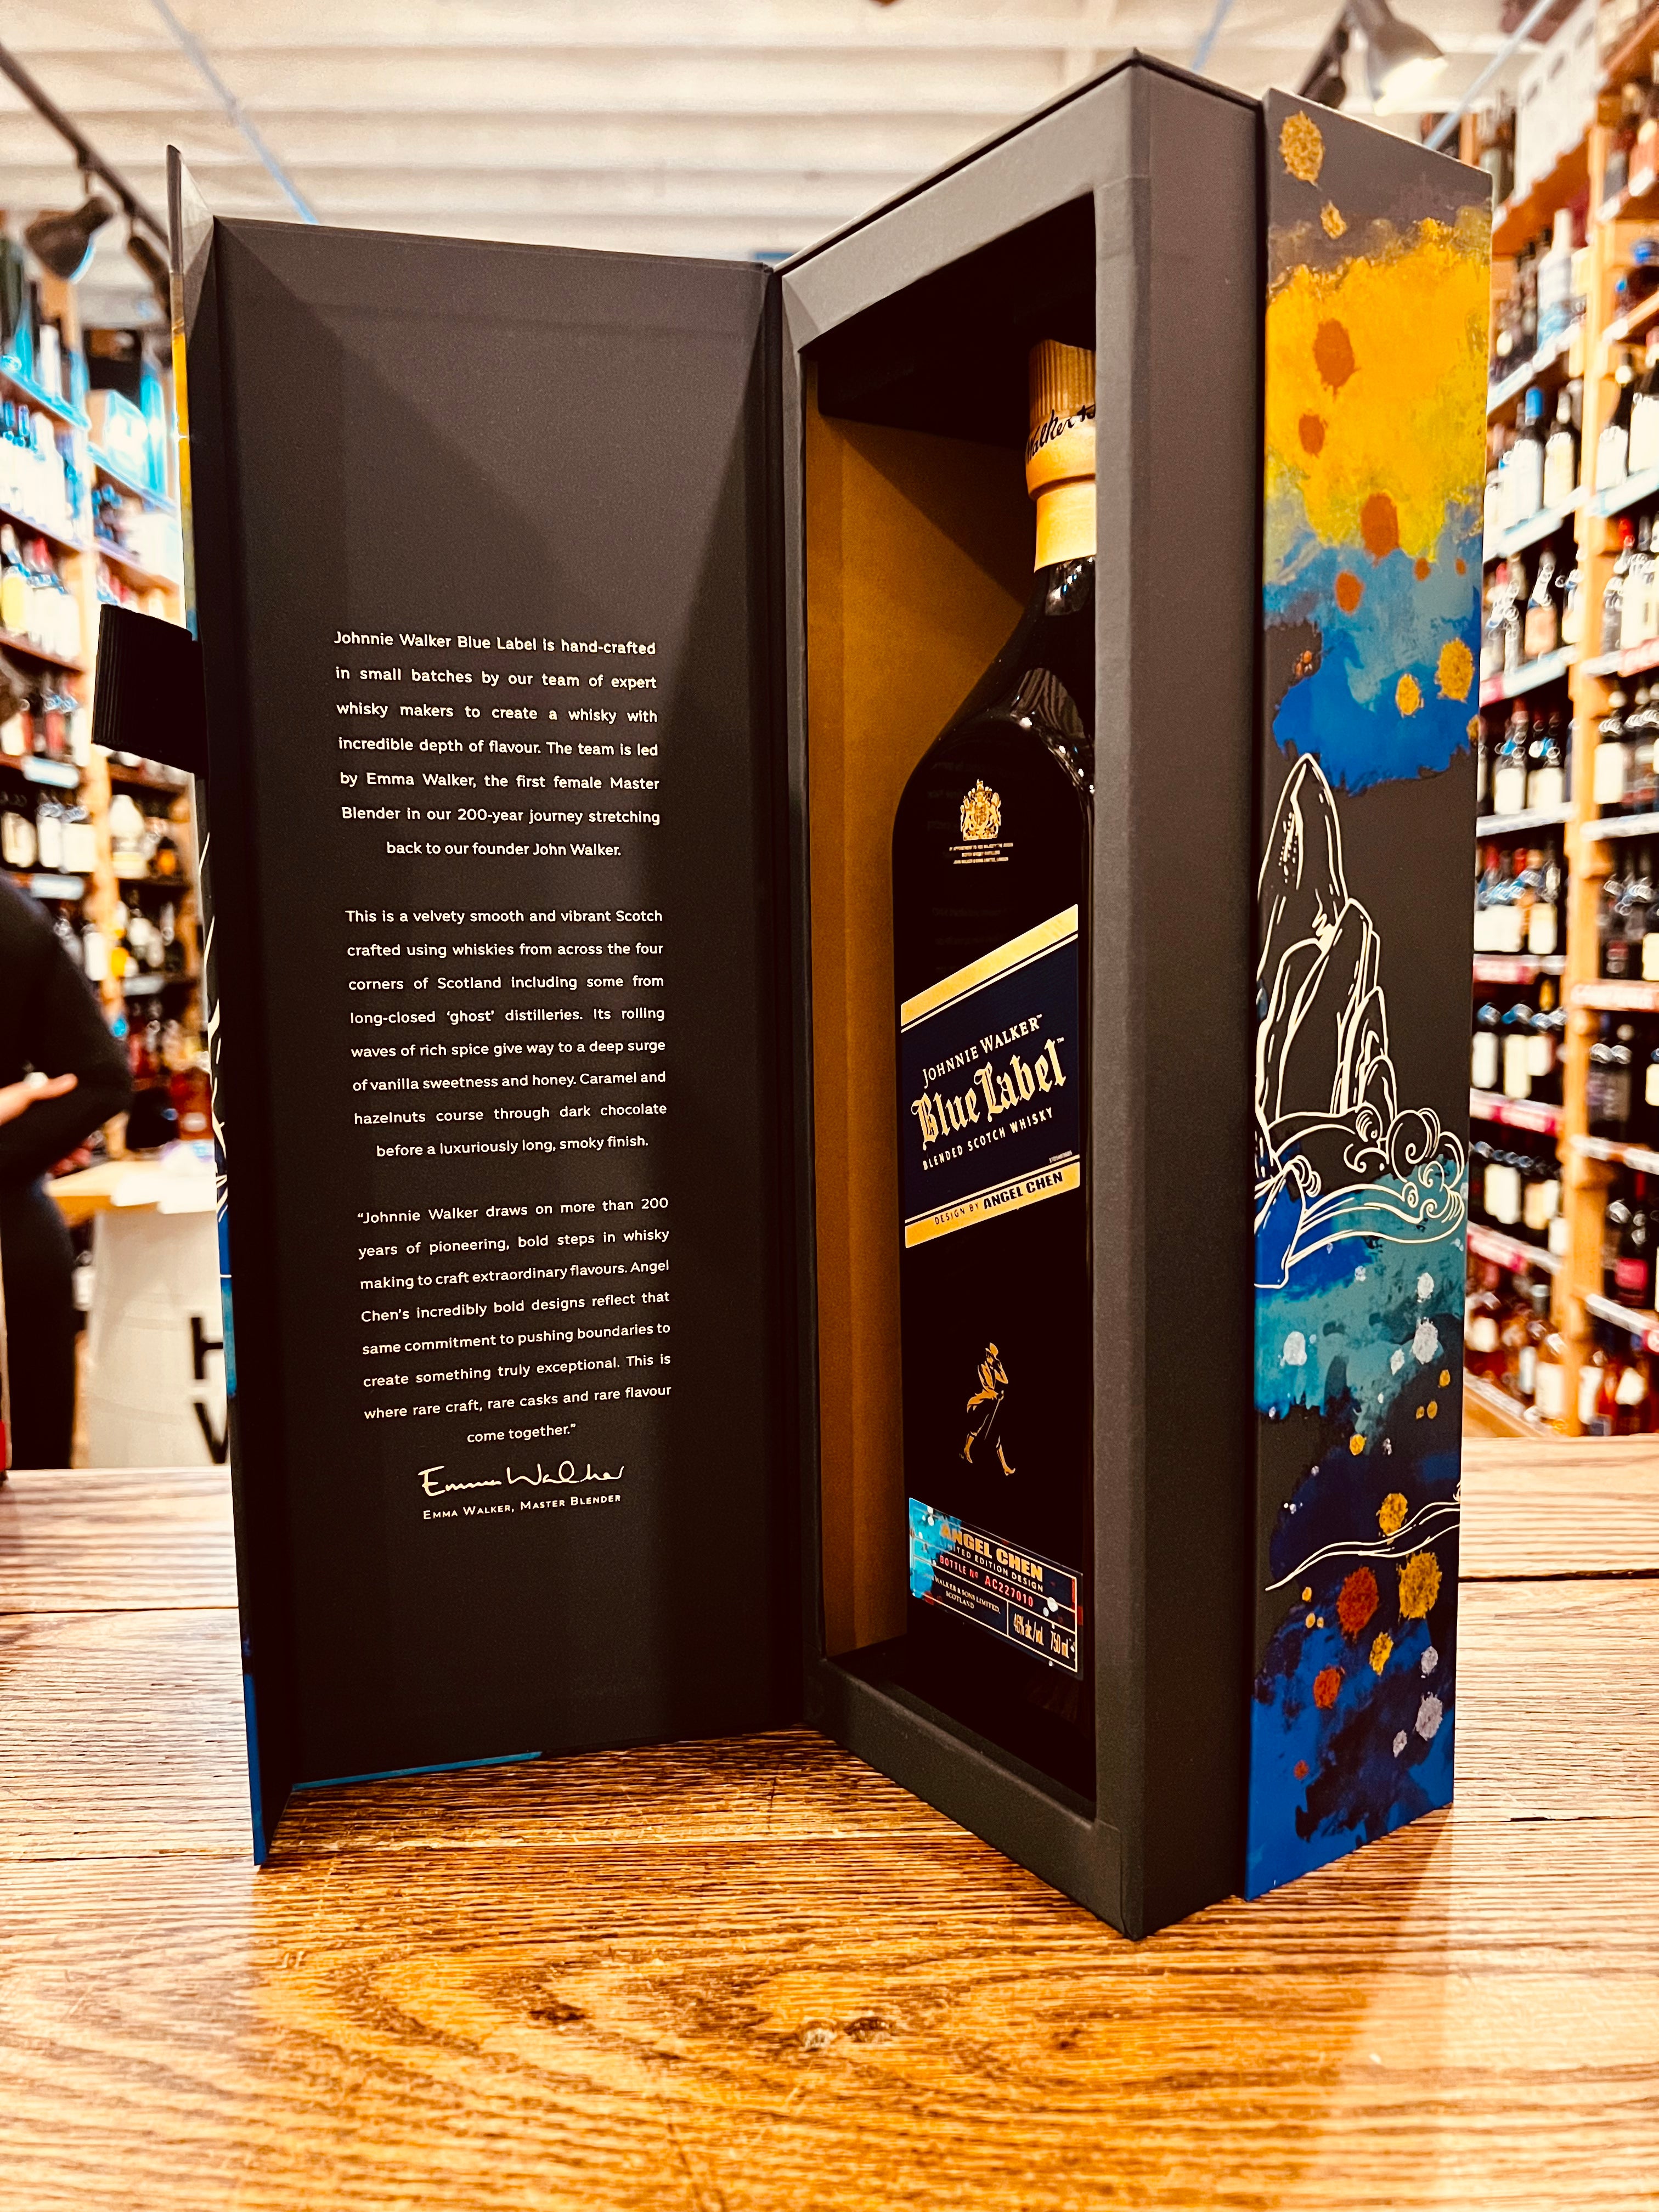 Johnnie Walker Blue Label Year of the Rabbit Scotch Whisky 750mL an open blue box with colorful design on the side of it and a tall squared blue glass bottle inside of the box